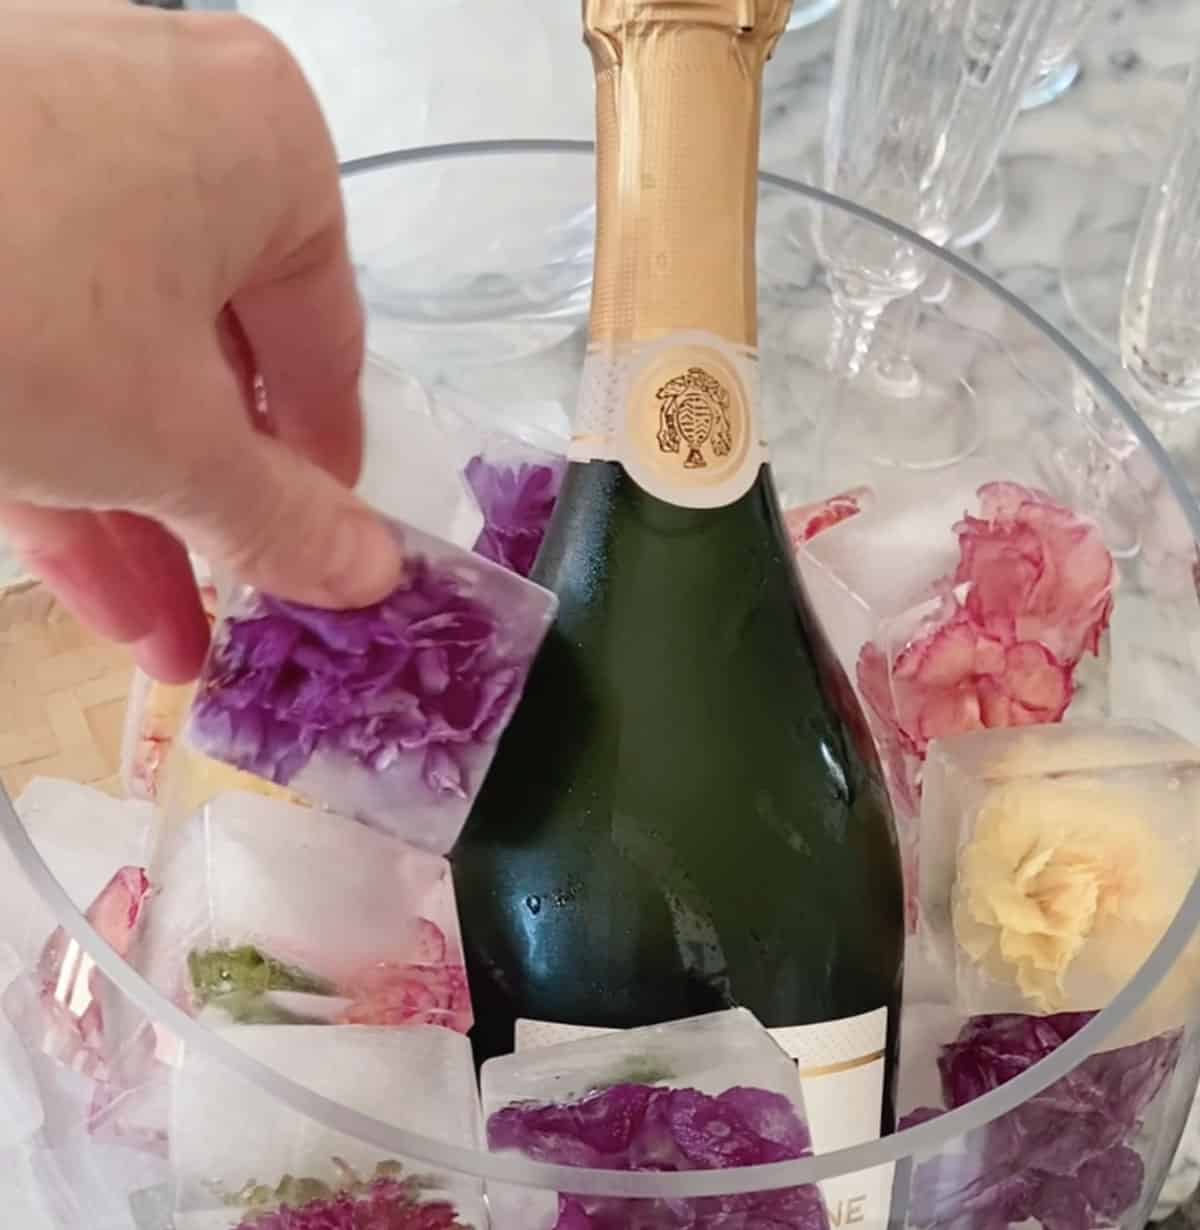 Flower ice cubes for chilling wine